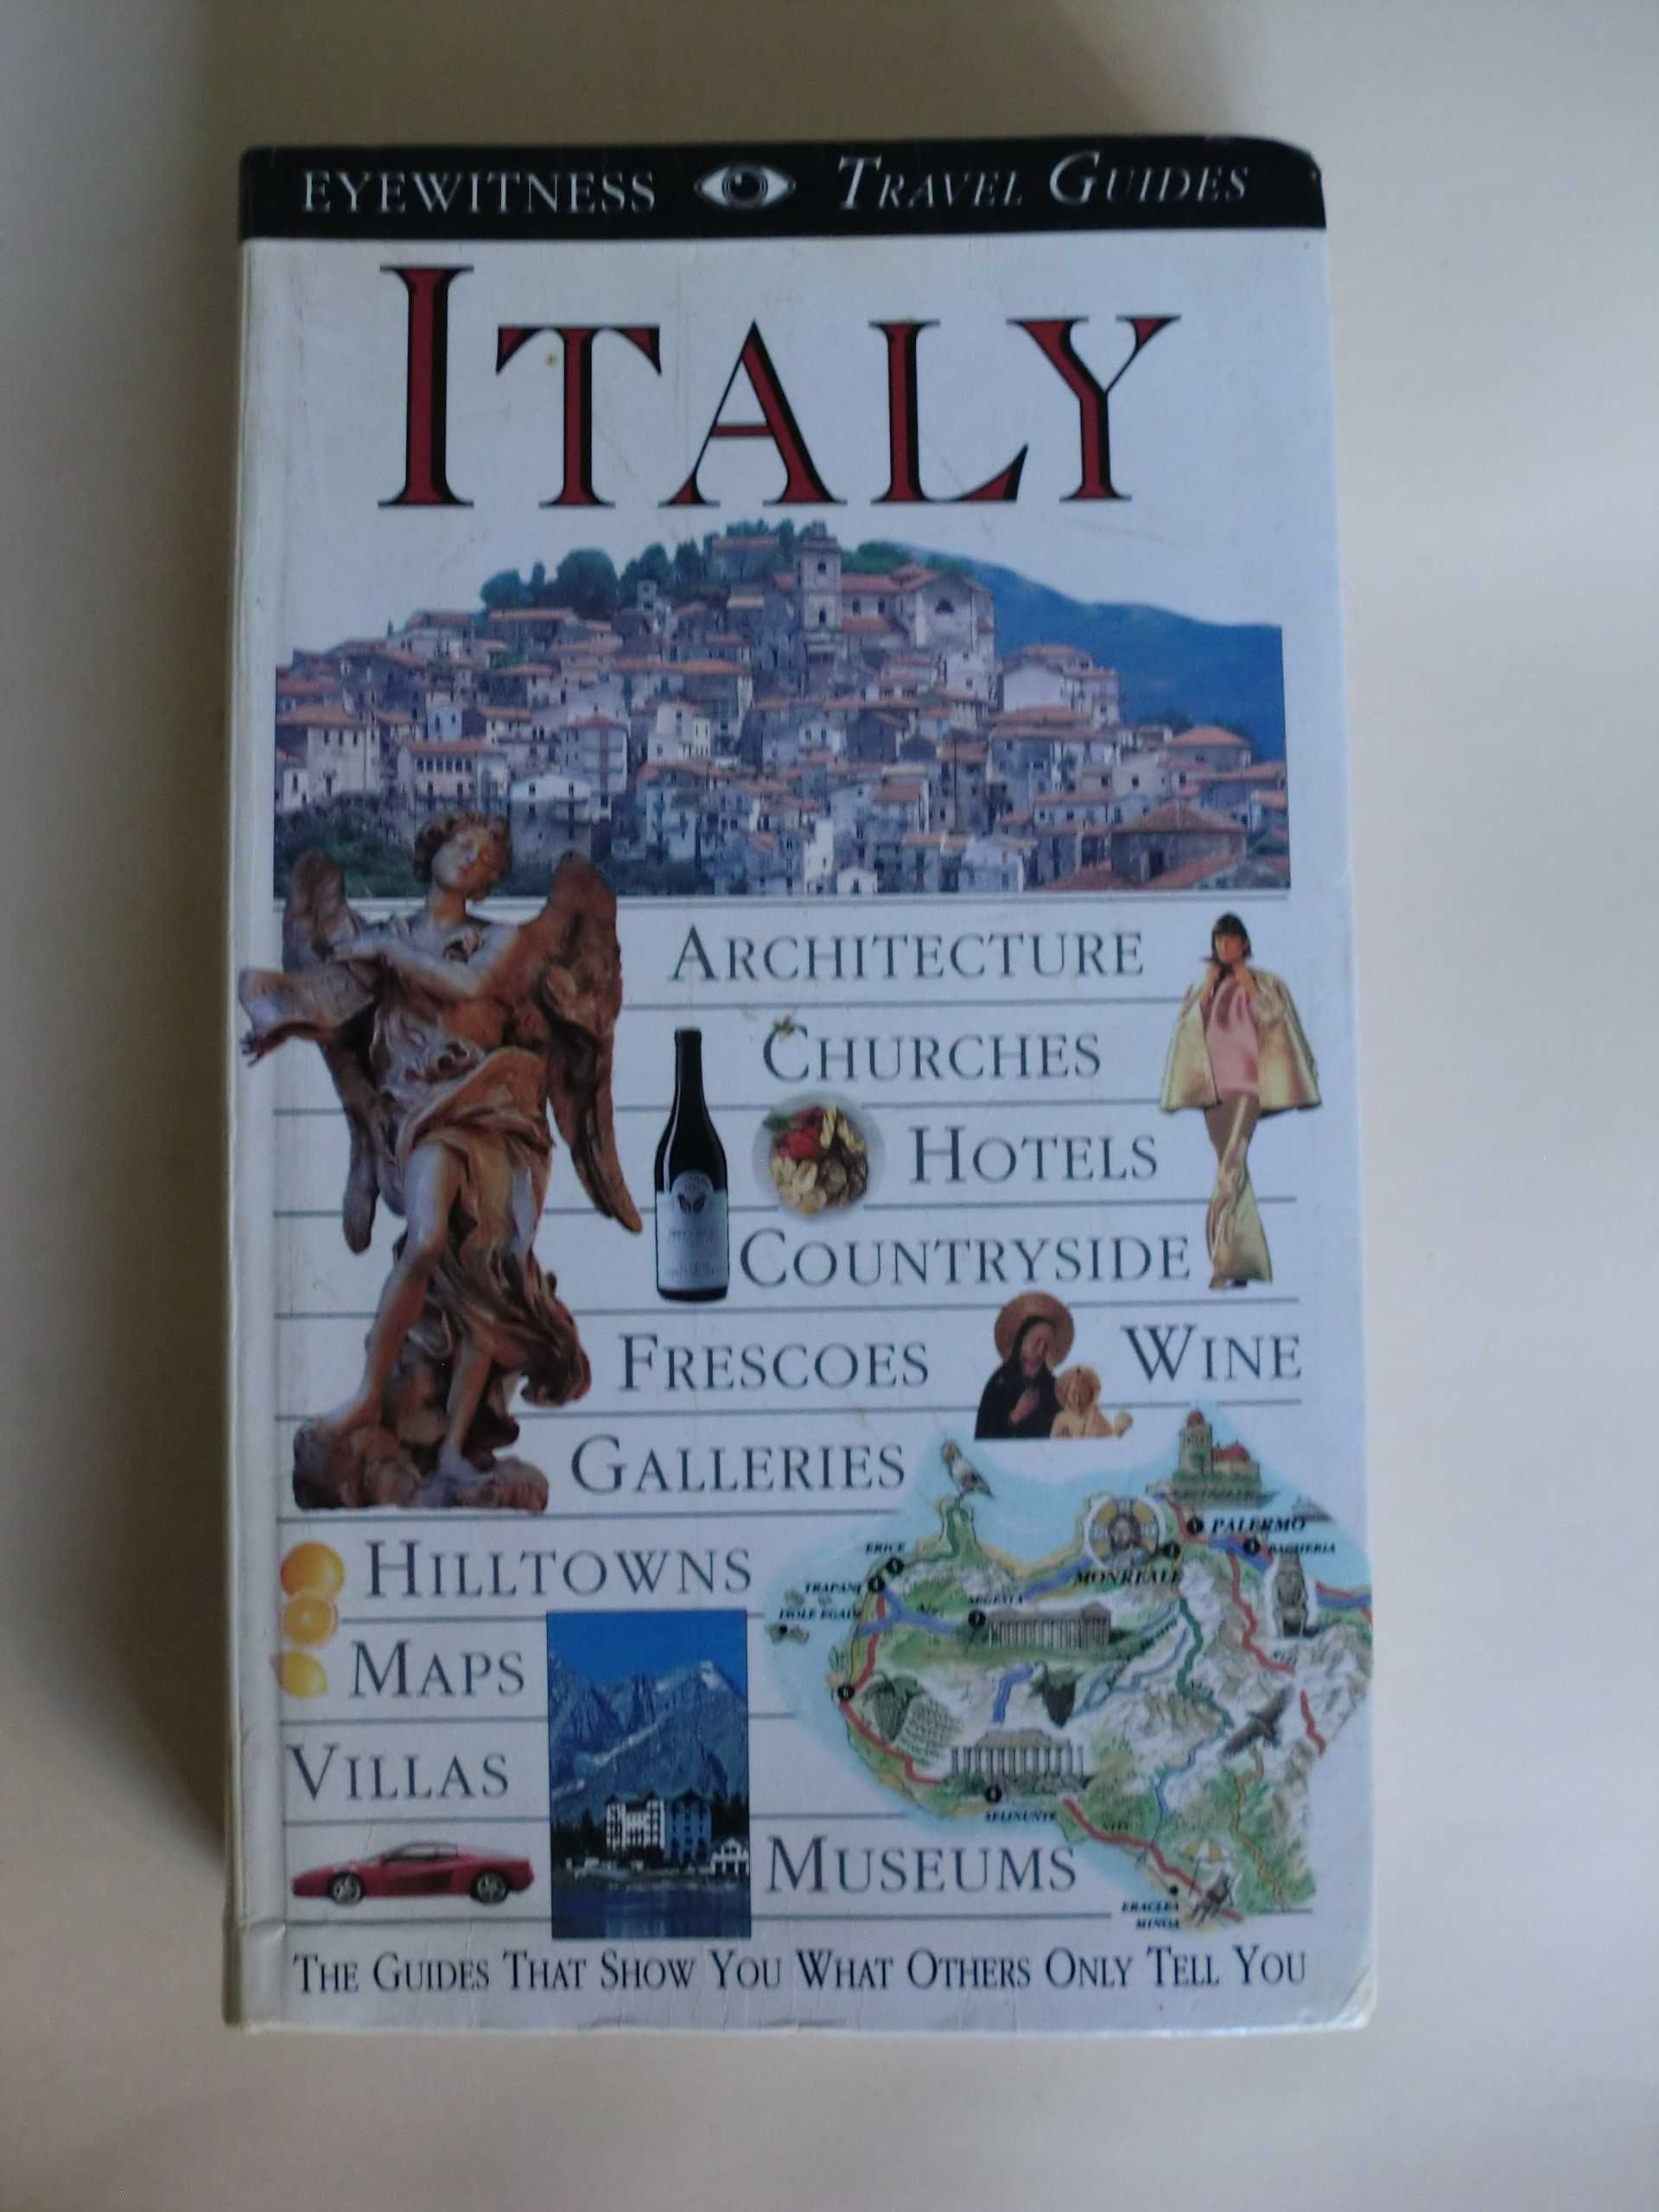 Italy
Eyewitness Travel Guides